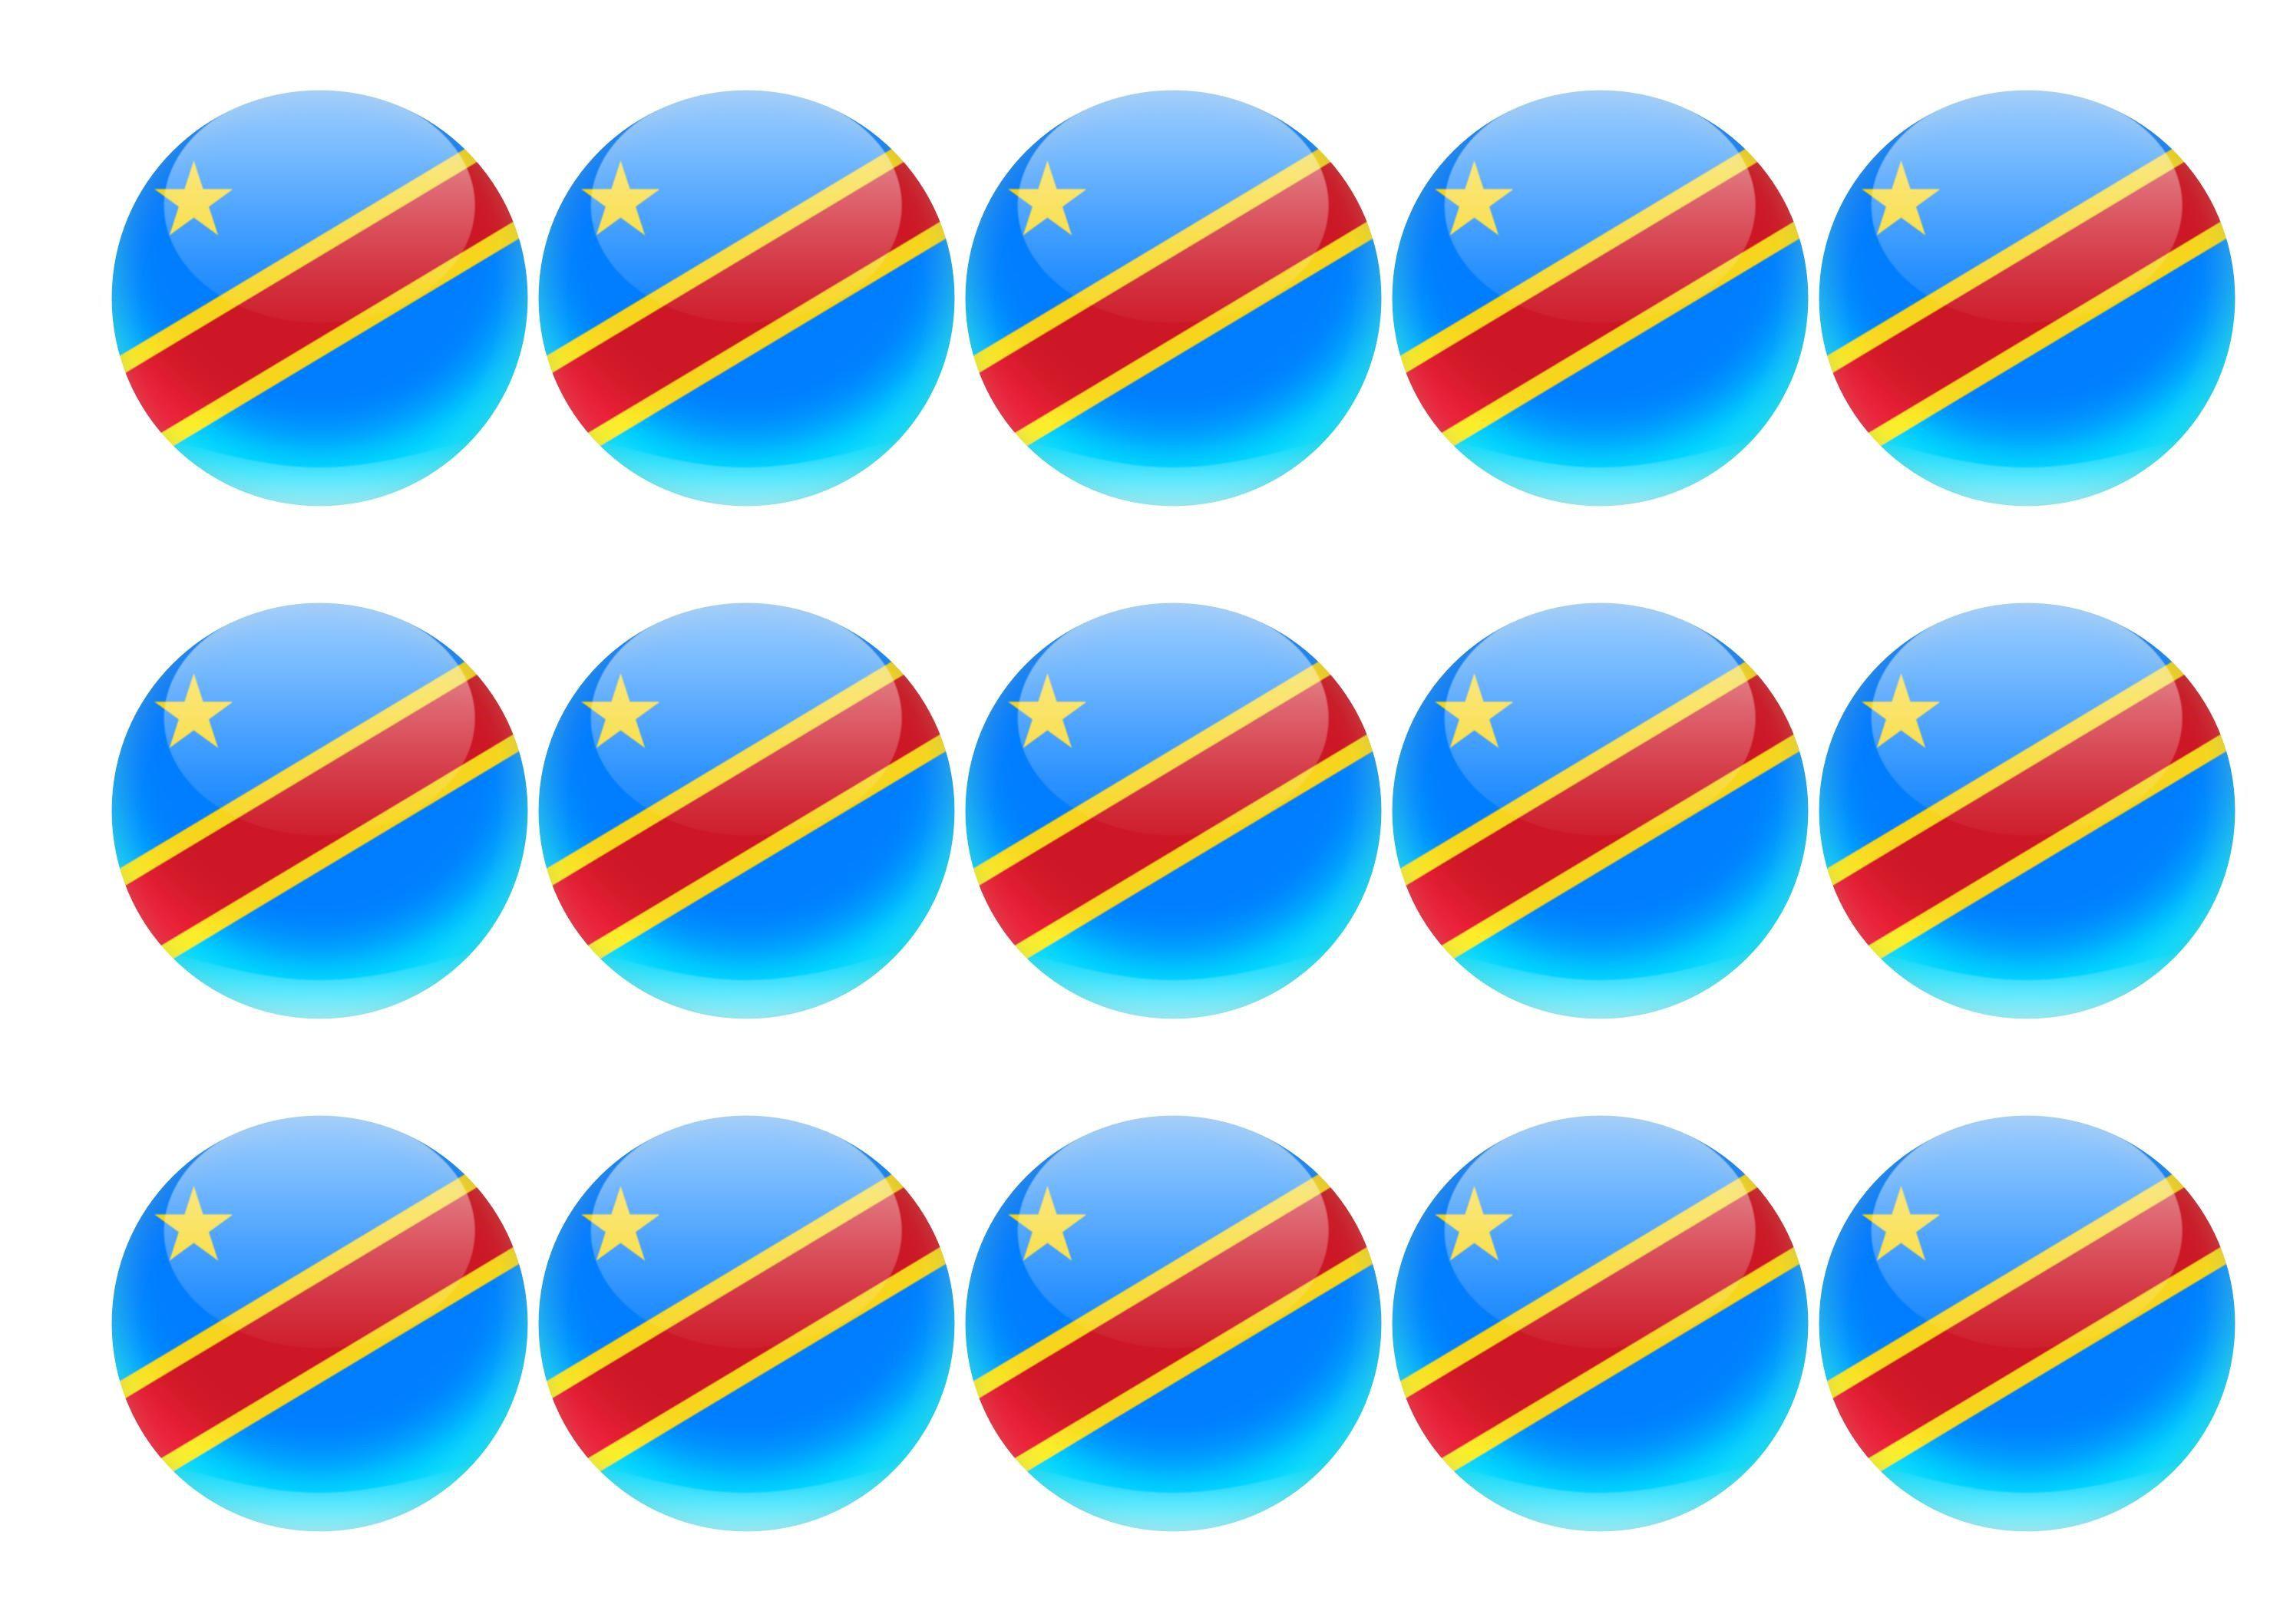 15 x 50mm printed eible cupcake toppers - Democratic Republic of the Congo